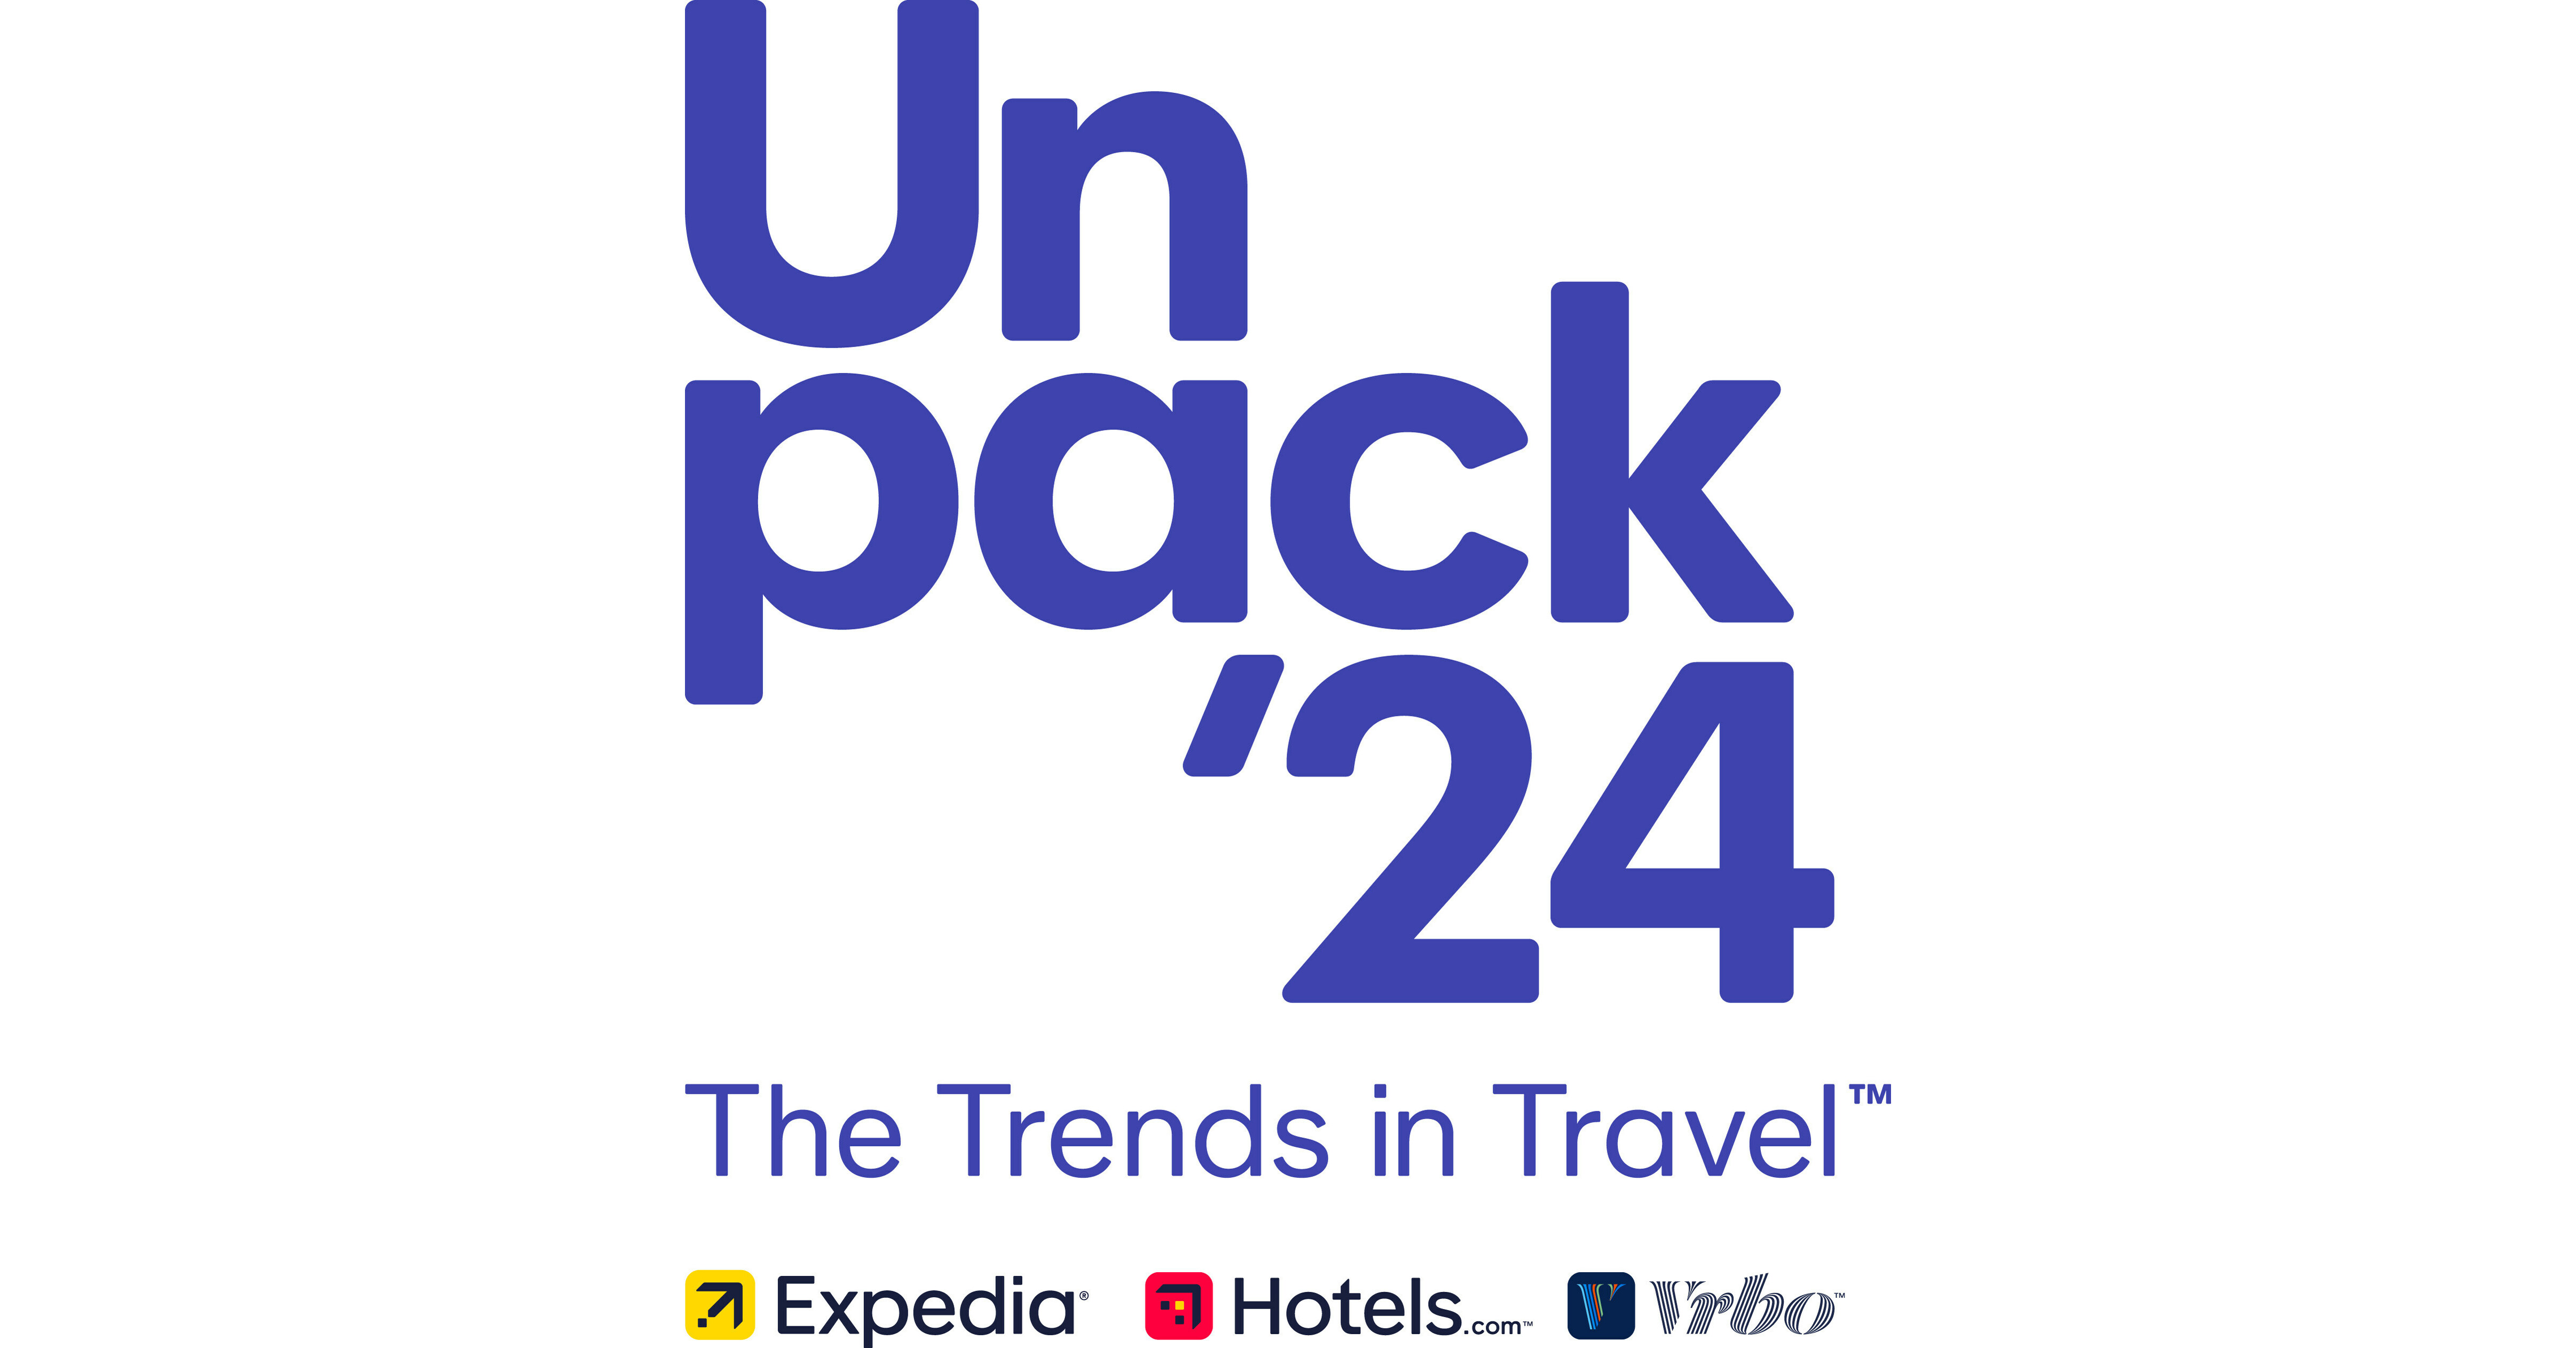 the trends in travel from Expedia, Hotels.com, and Vrbo